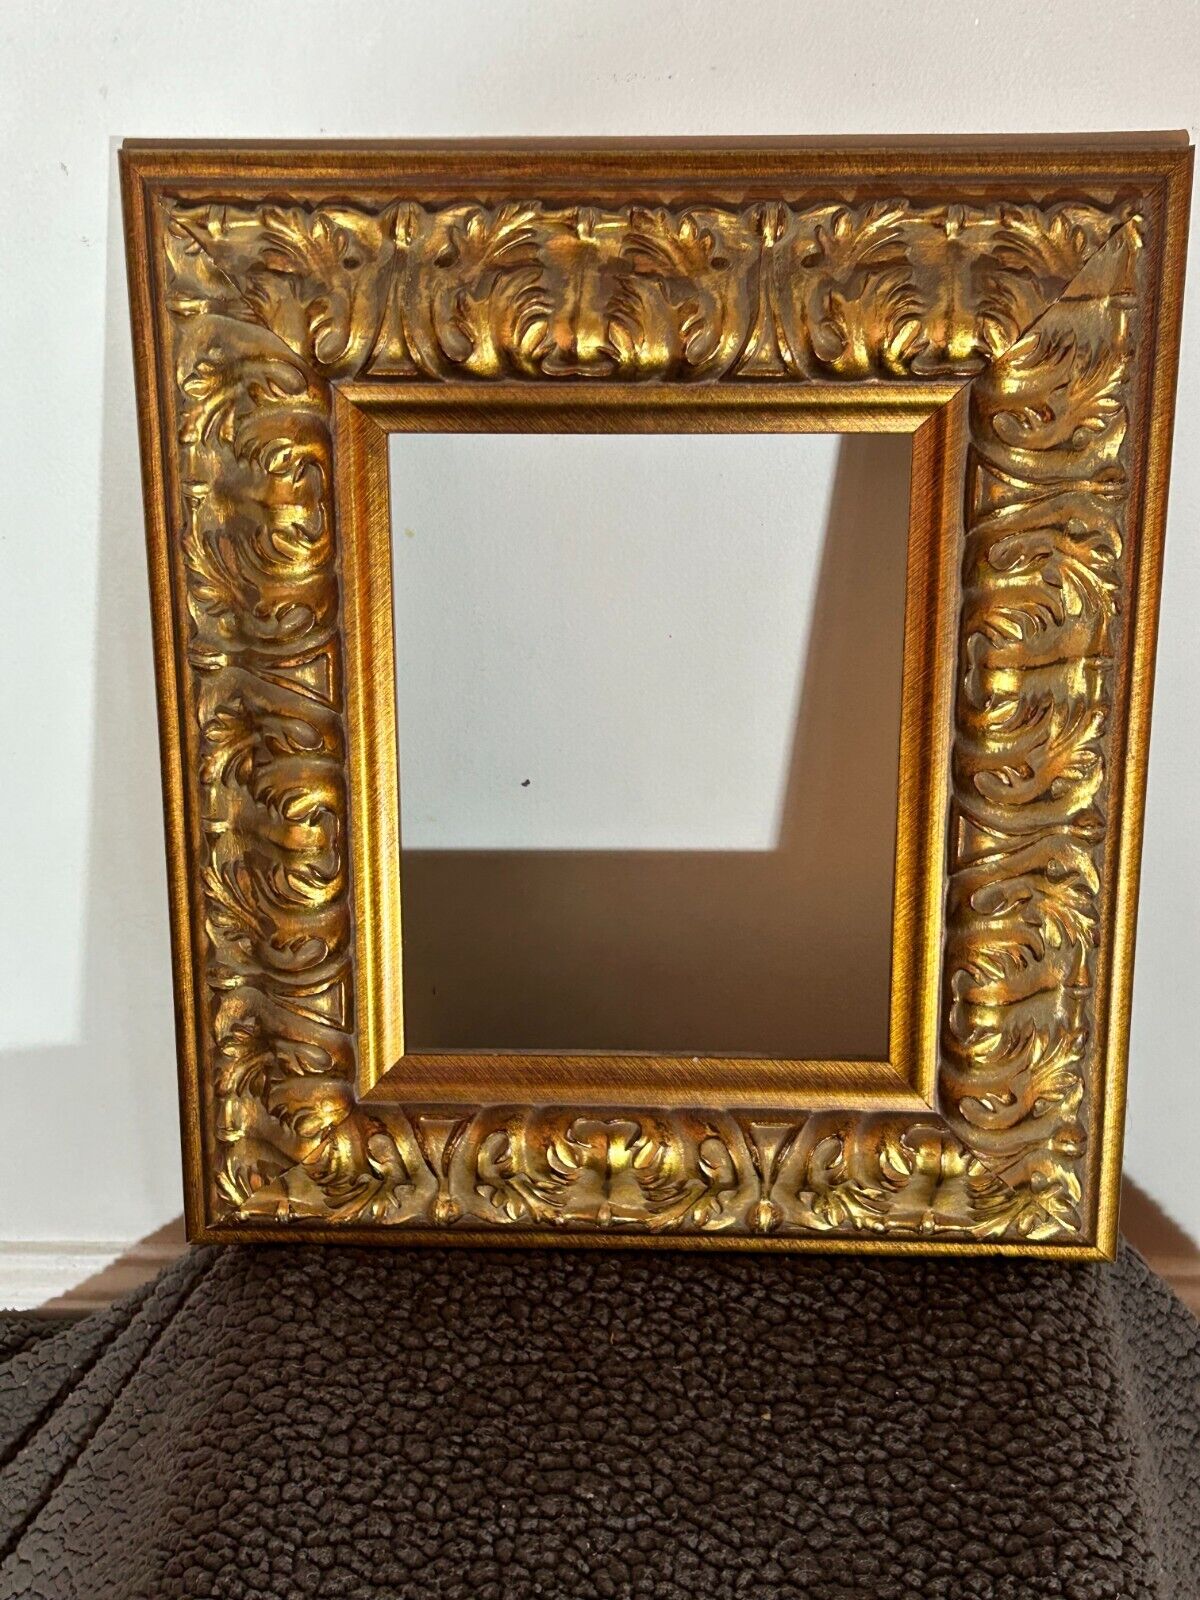 ANTIQUE BAROQUE STYLE PICTURE FRAME WALL HANGING GOLD 8 X 10 ART CLASSIC